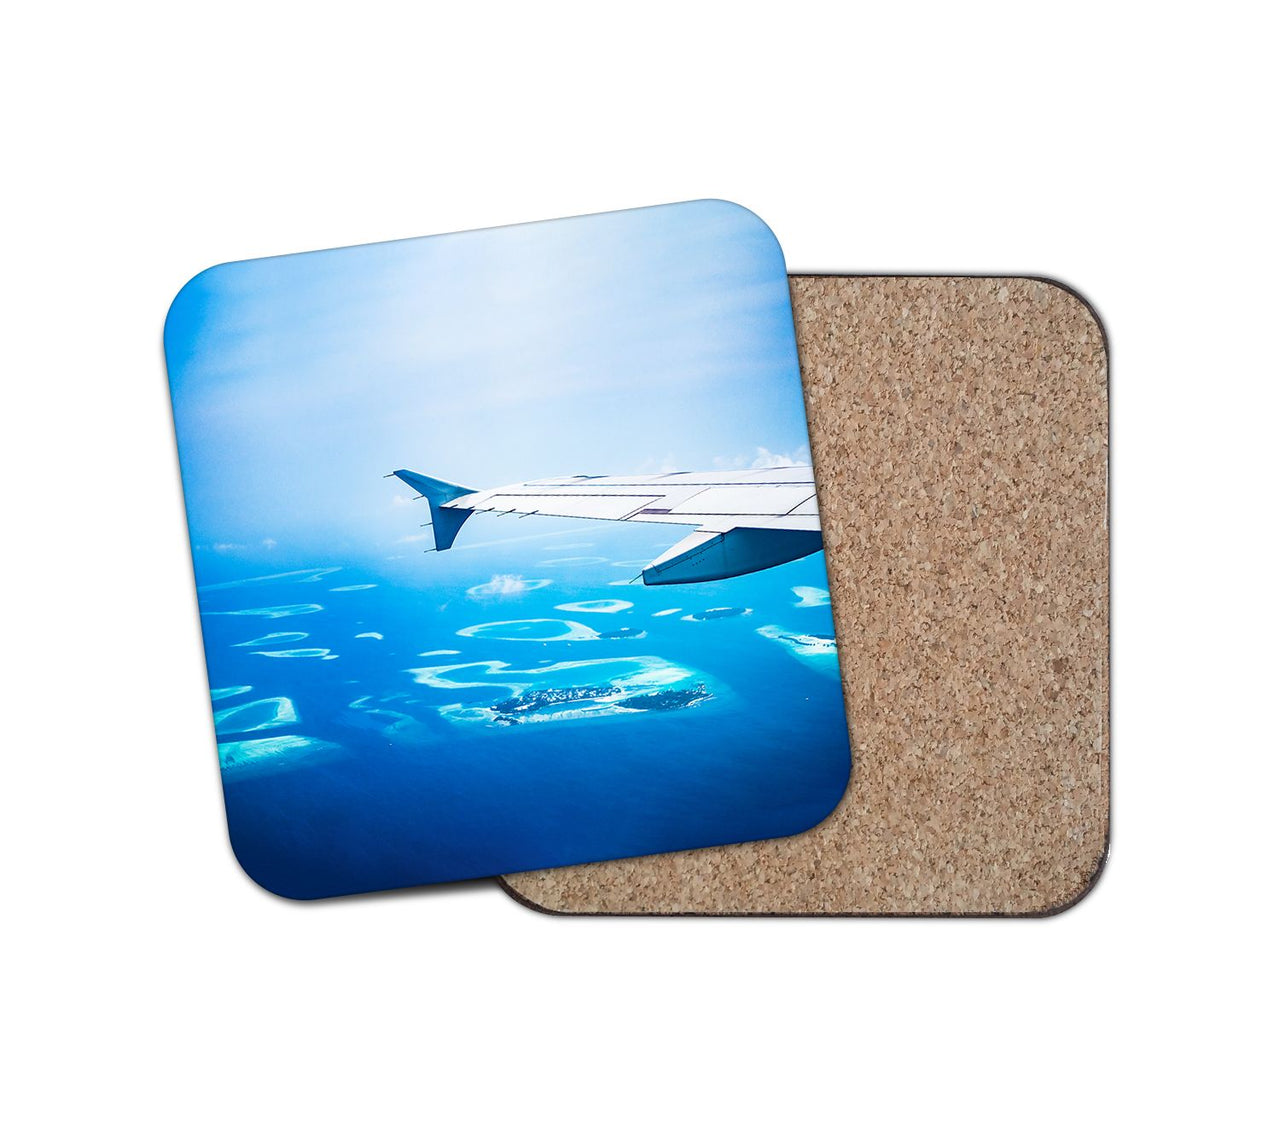 Outstanding View Through Airplane Wing Designed Coasters